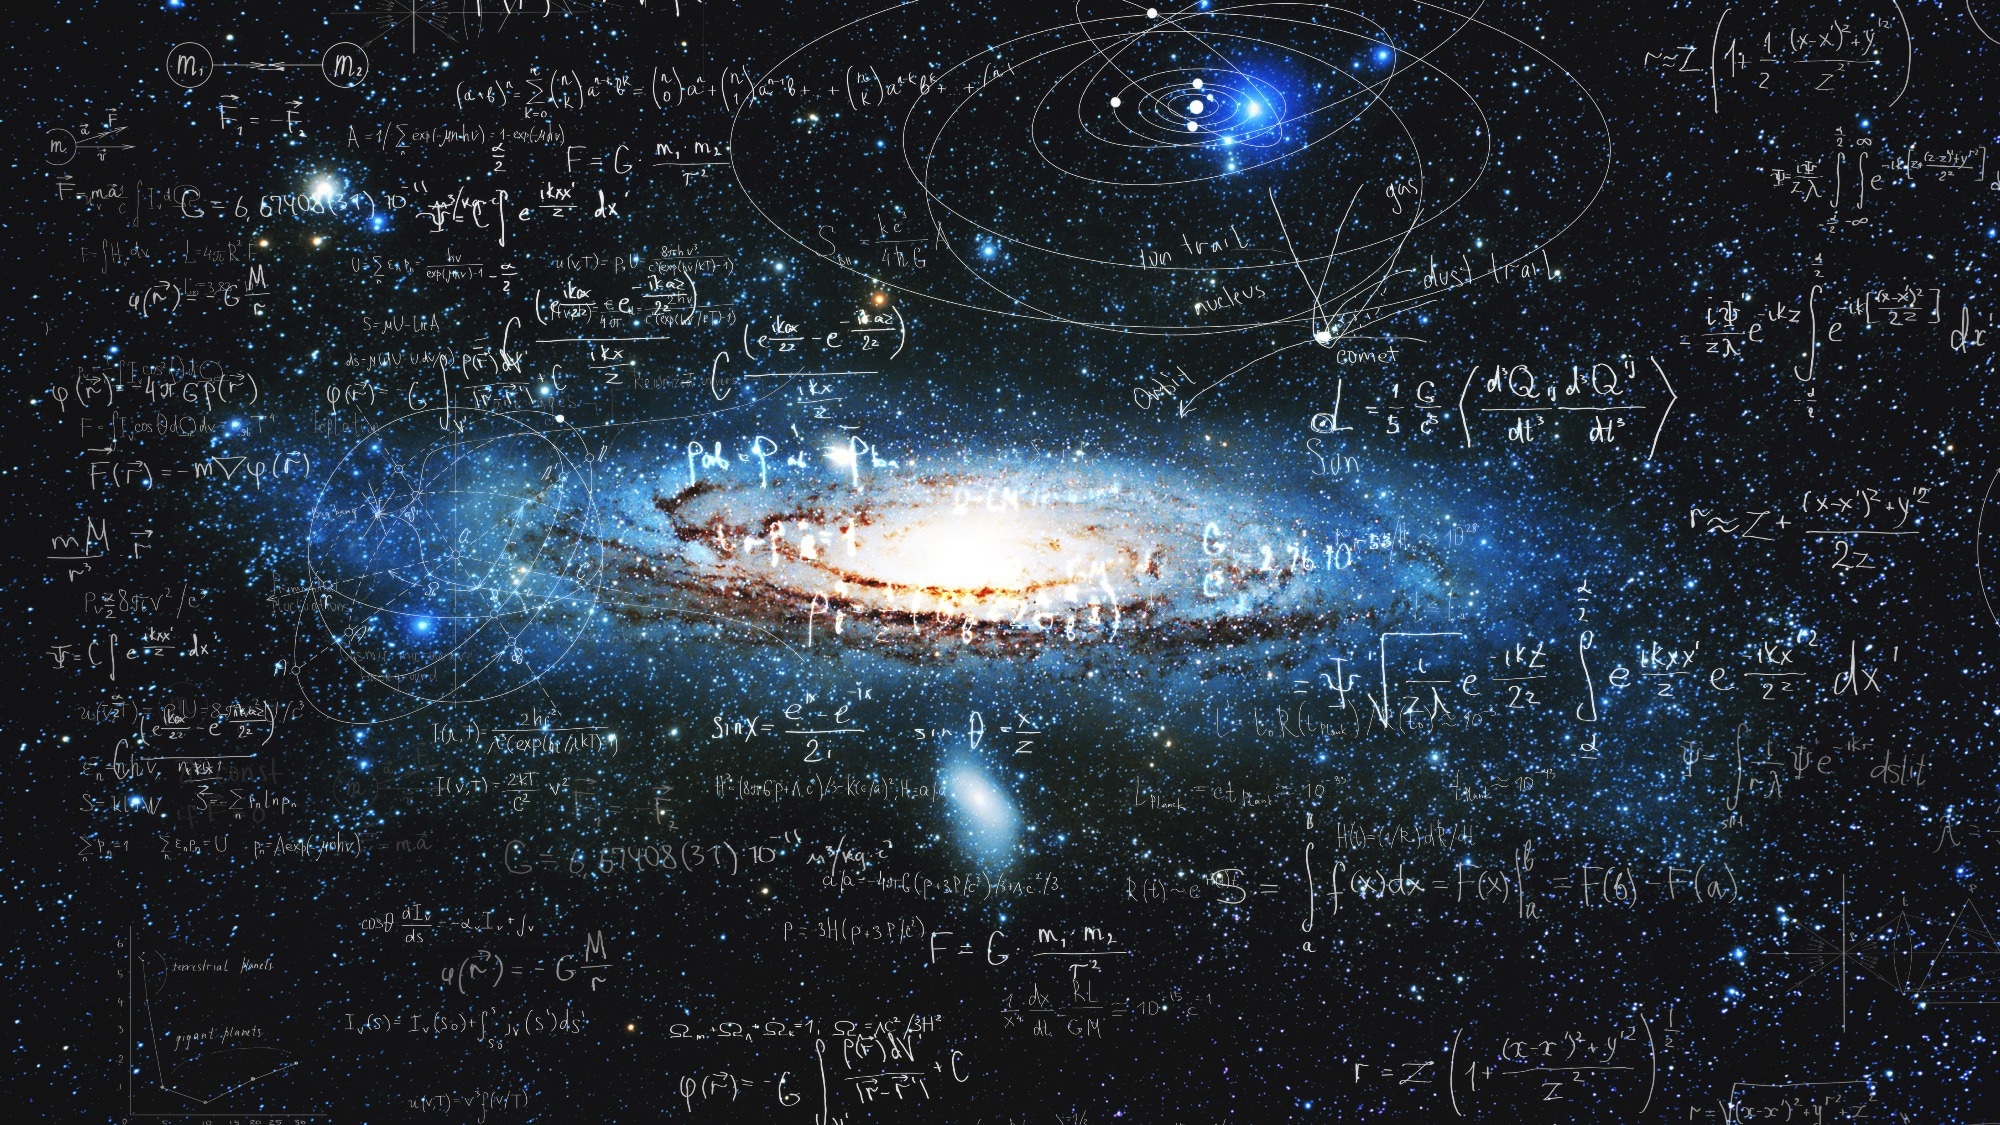 HoloGW Project: Tackling Unresolved Mysteries in Astrophysics and Cosmology